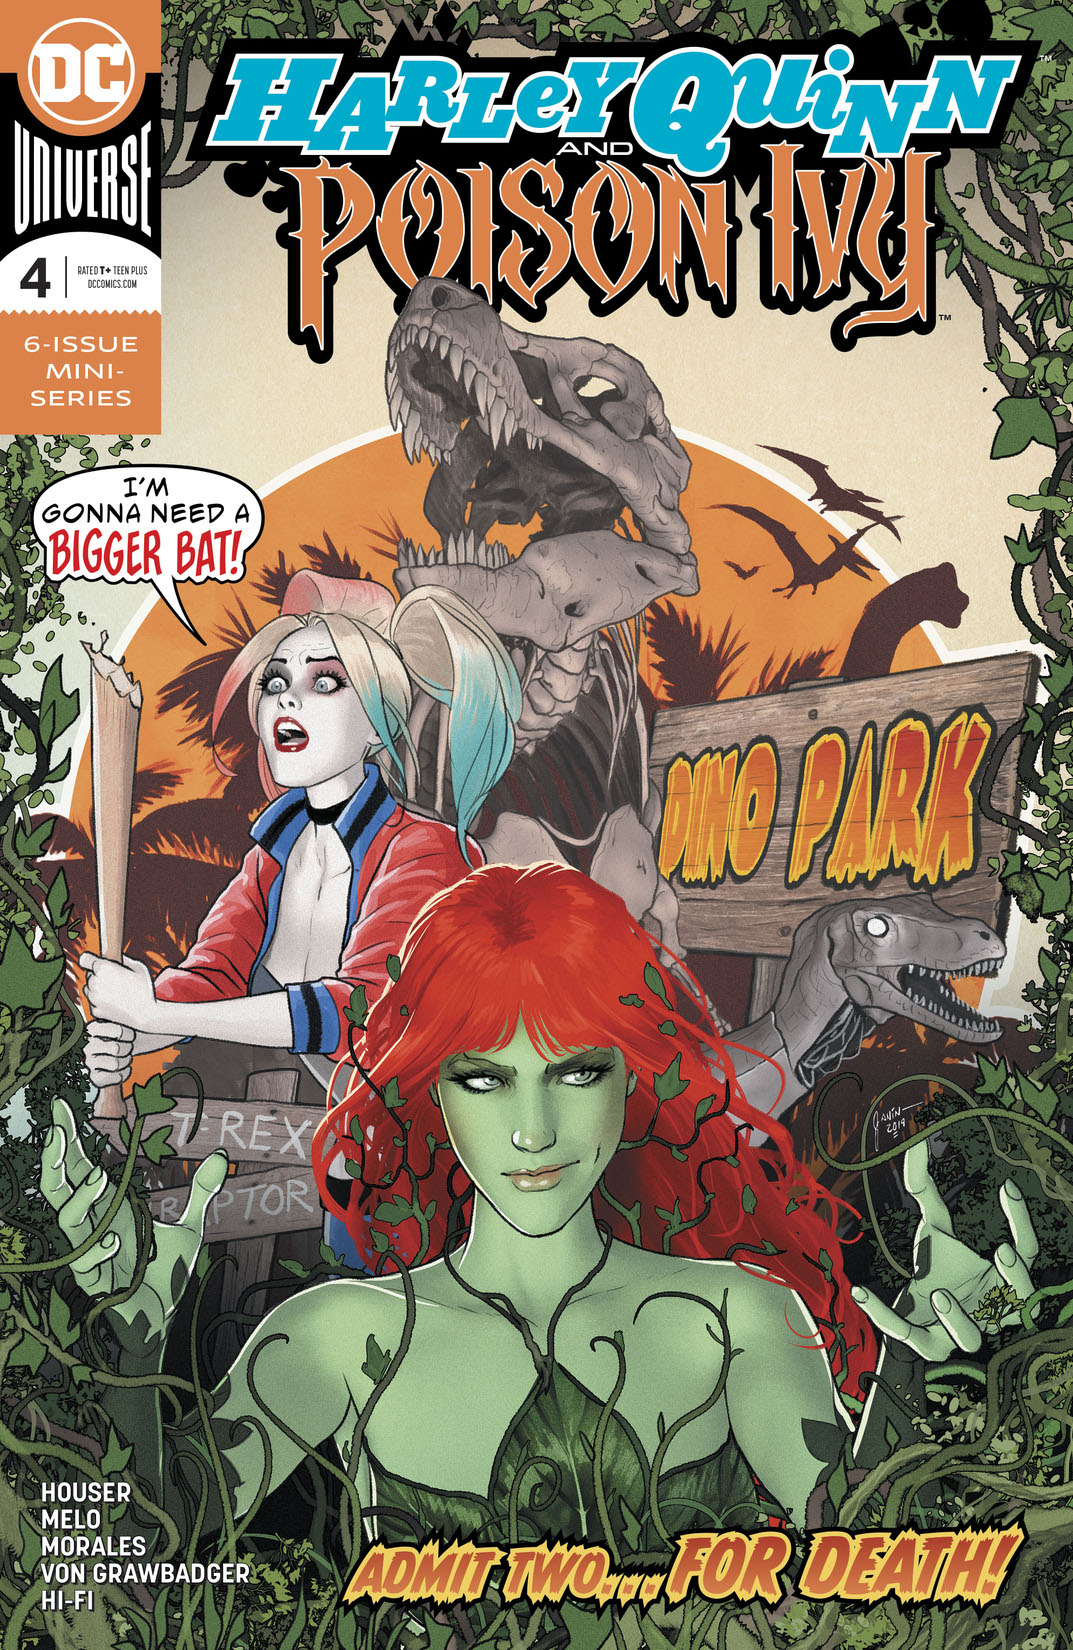 Harley Quinn & Poison Ivy #4 preview images